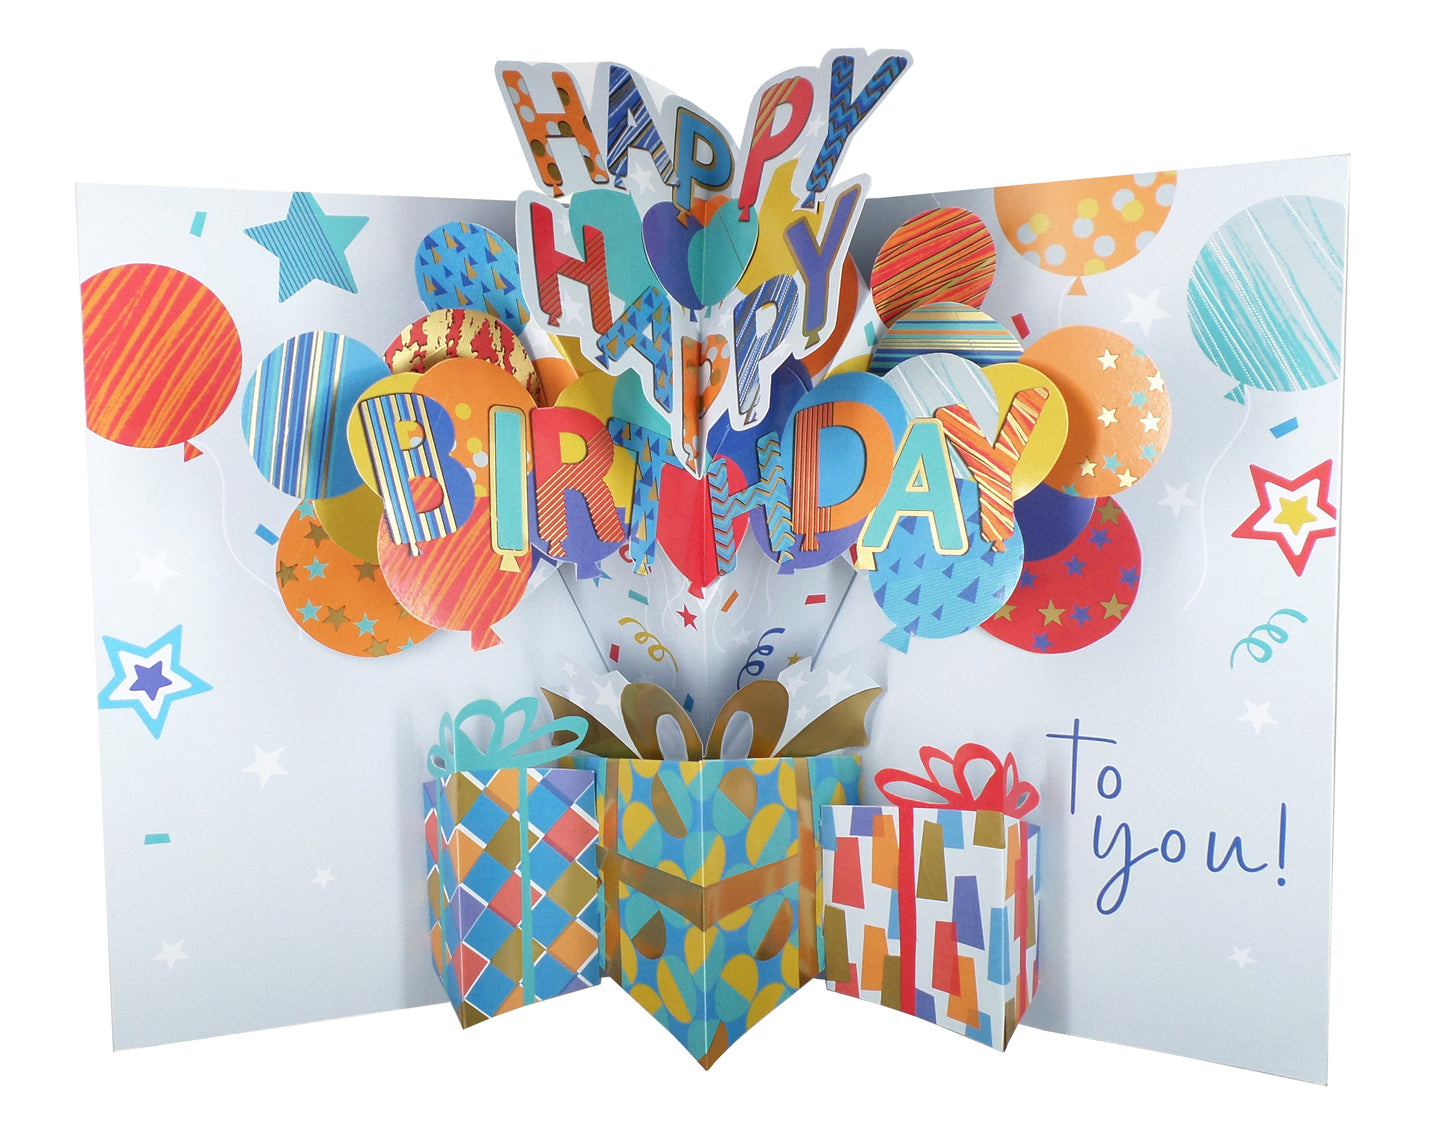 Pop Out Happy Birthday To You Balloons Card Just WOW!